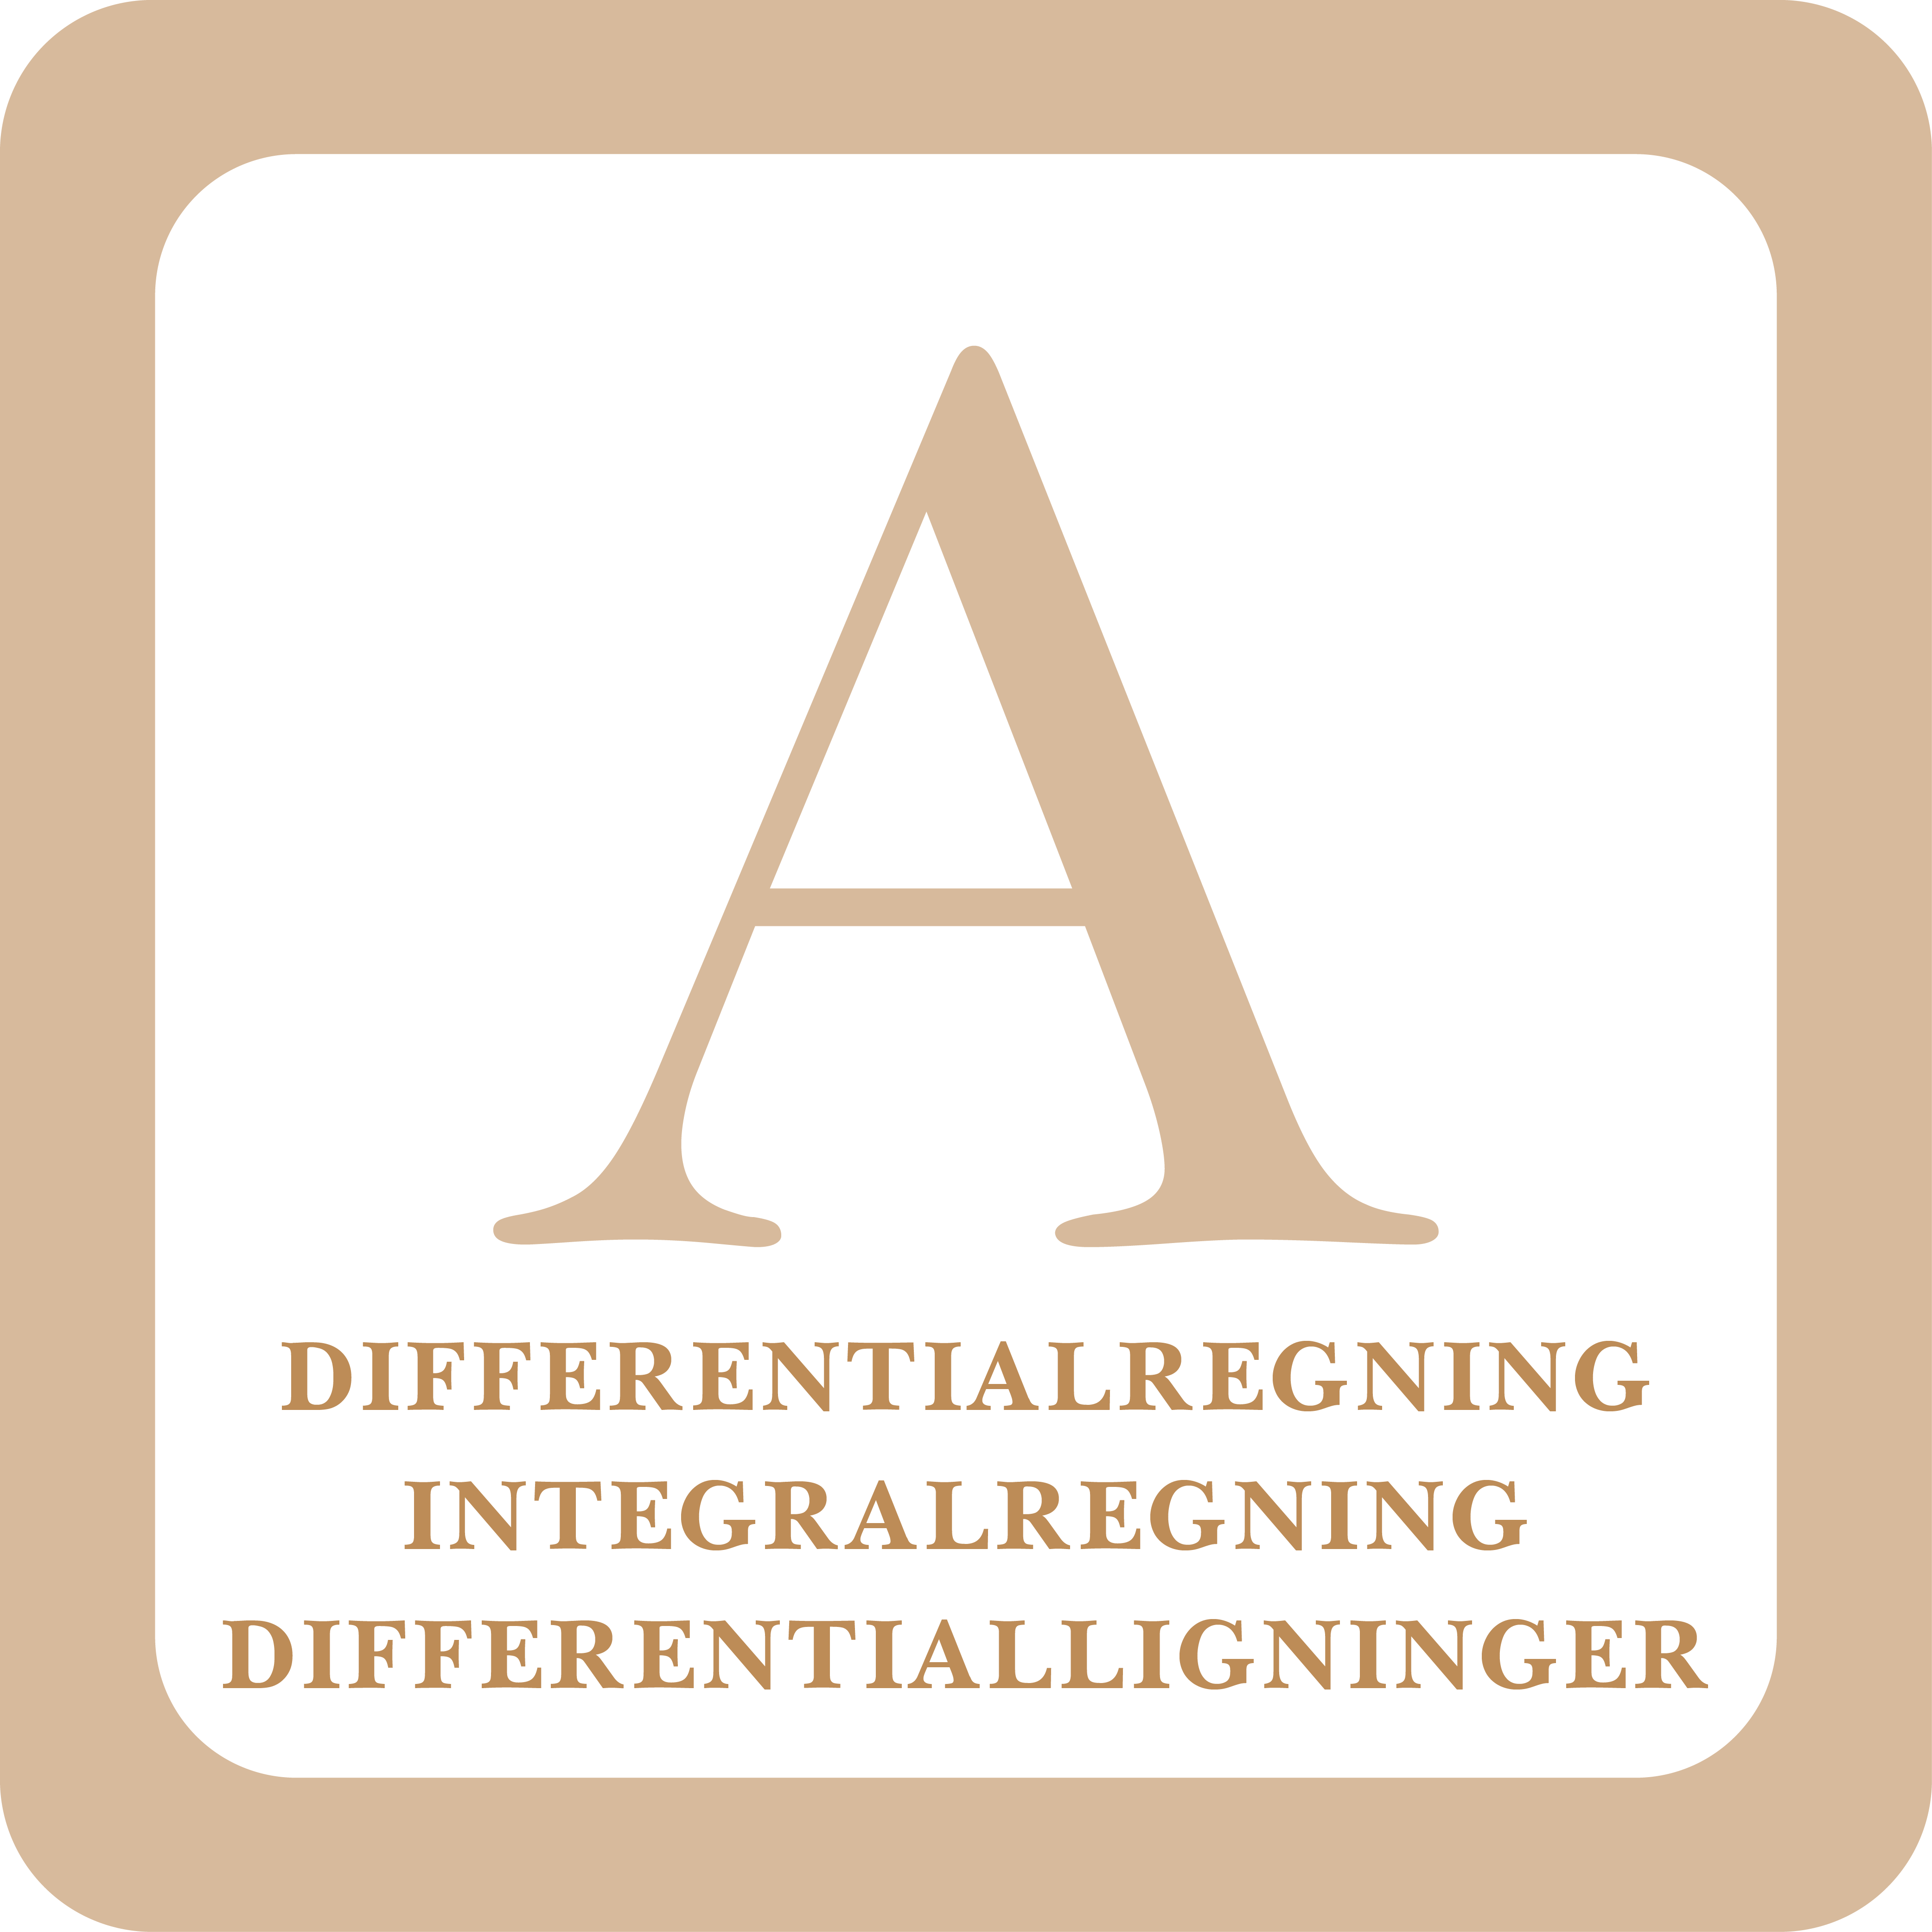 Read more about the article Differentialregning Integralregning Differentialregning